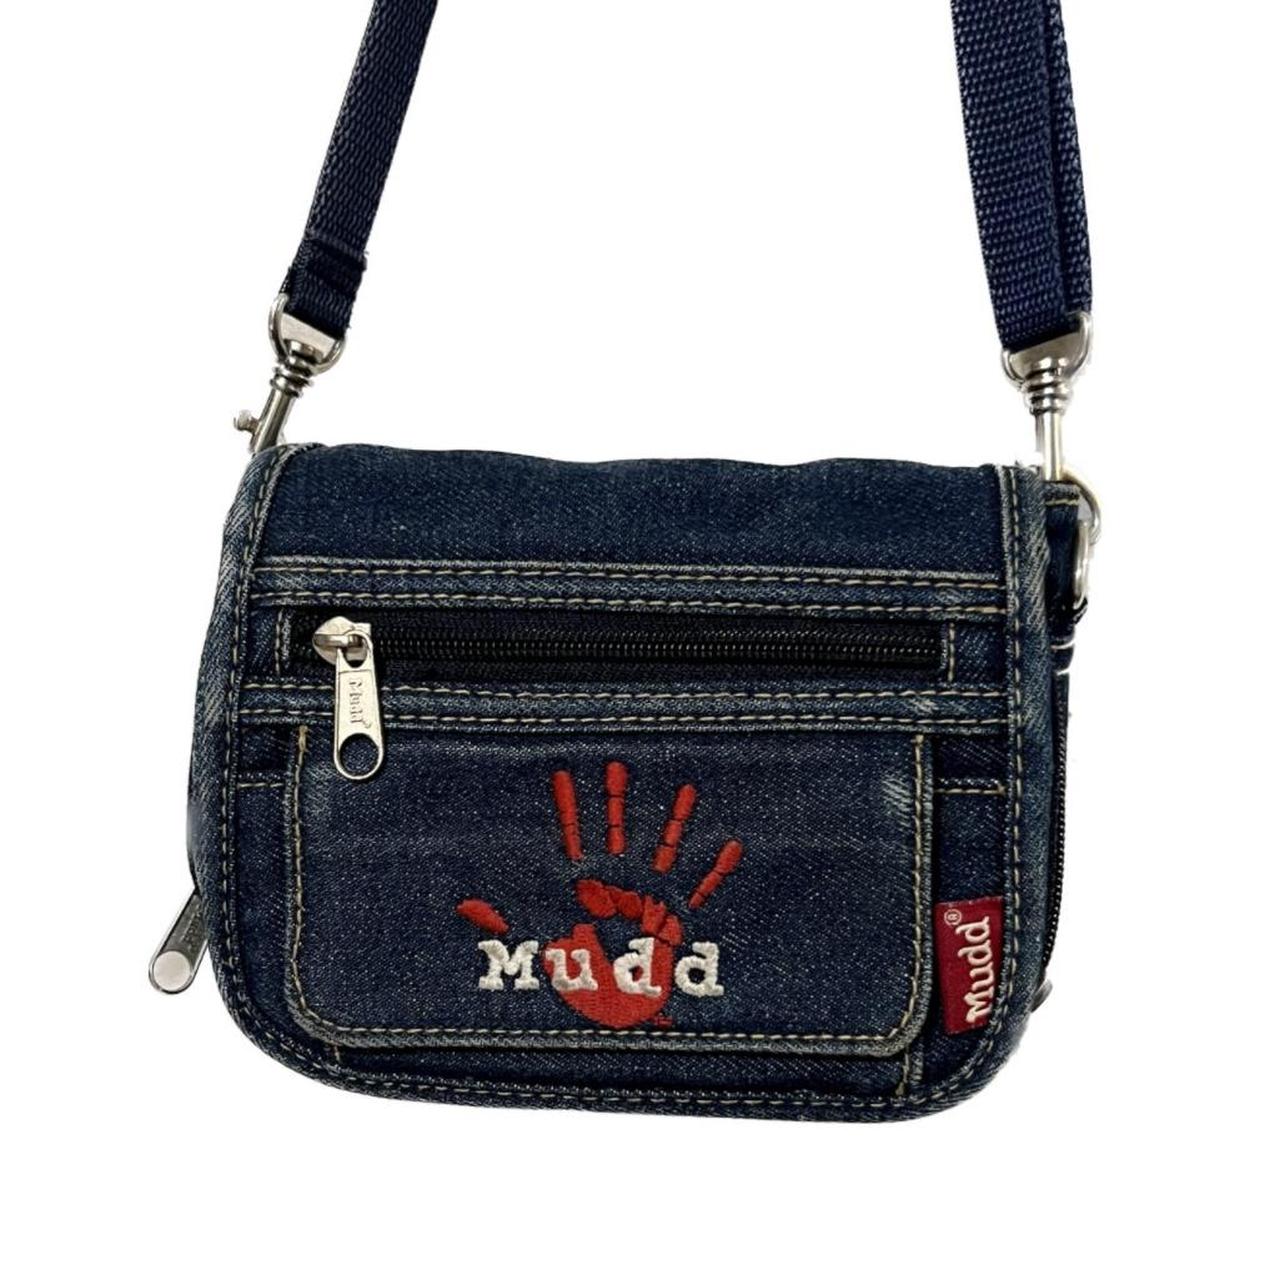 Mudd Clothing Women's Navy and Red Bag